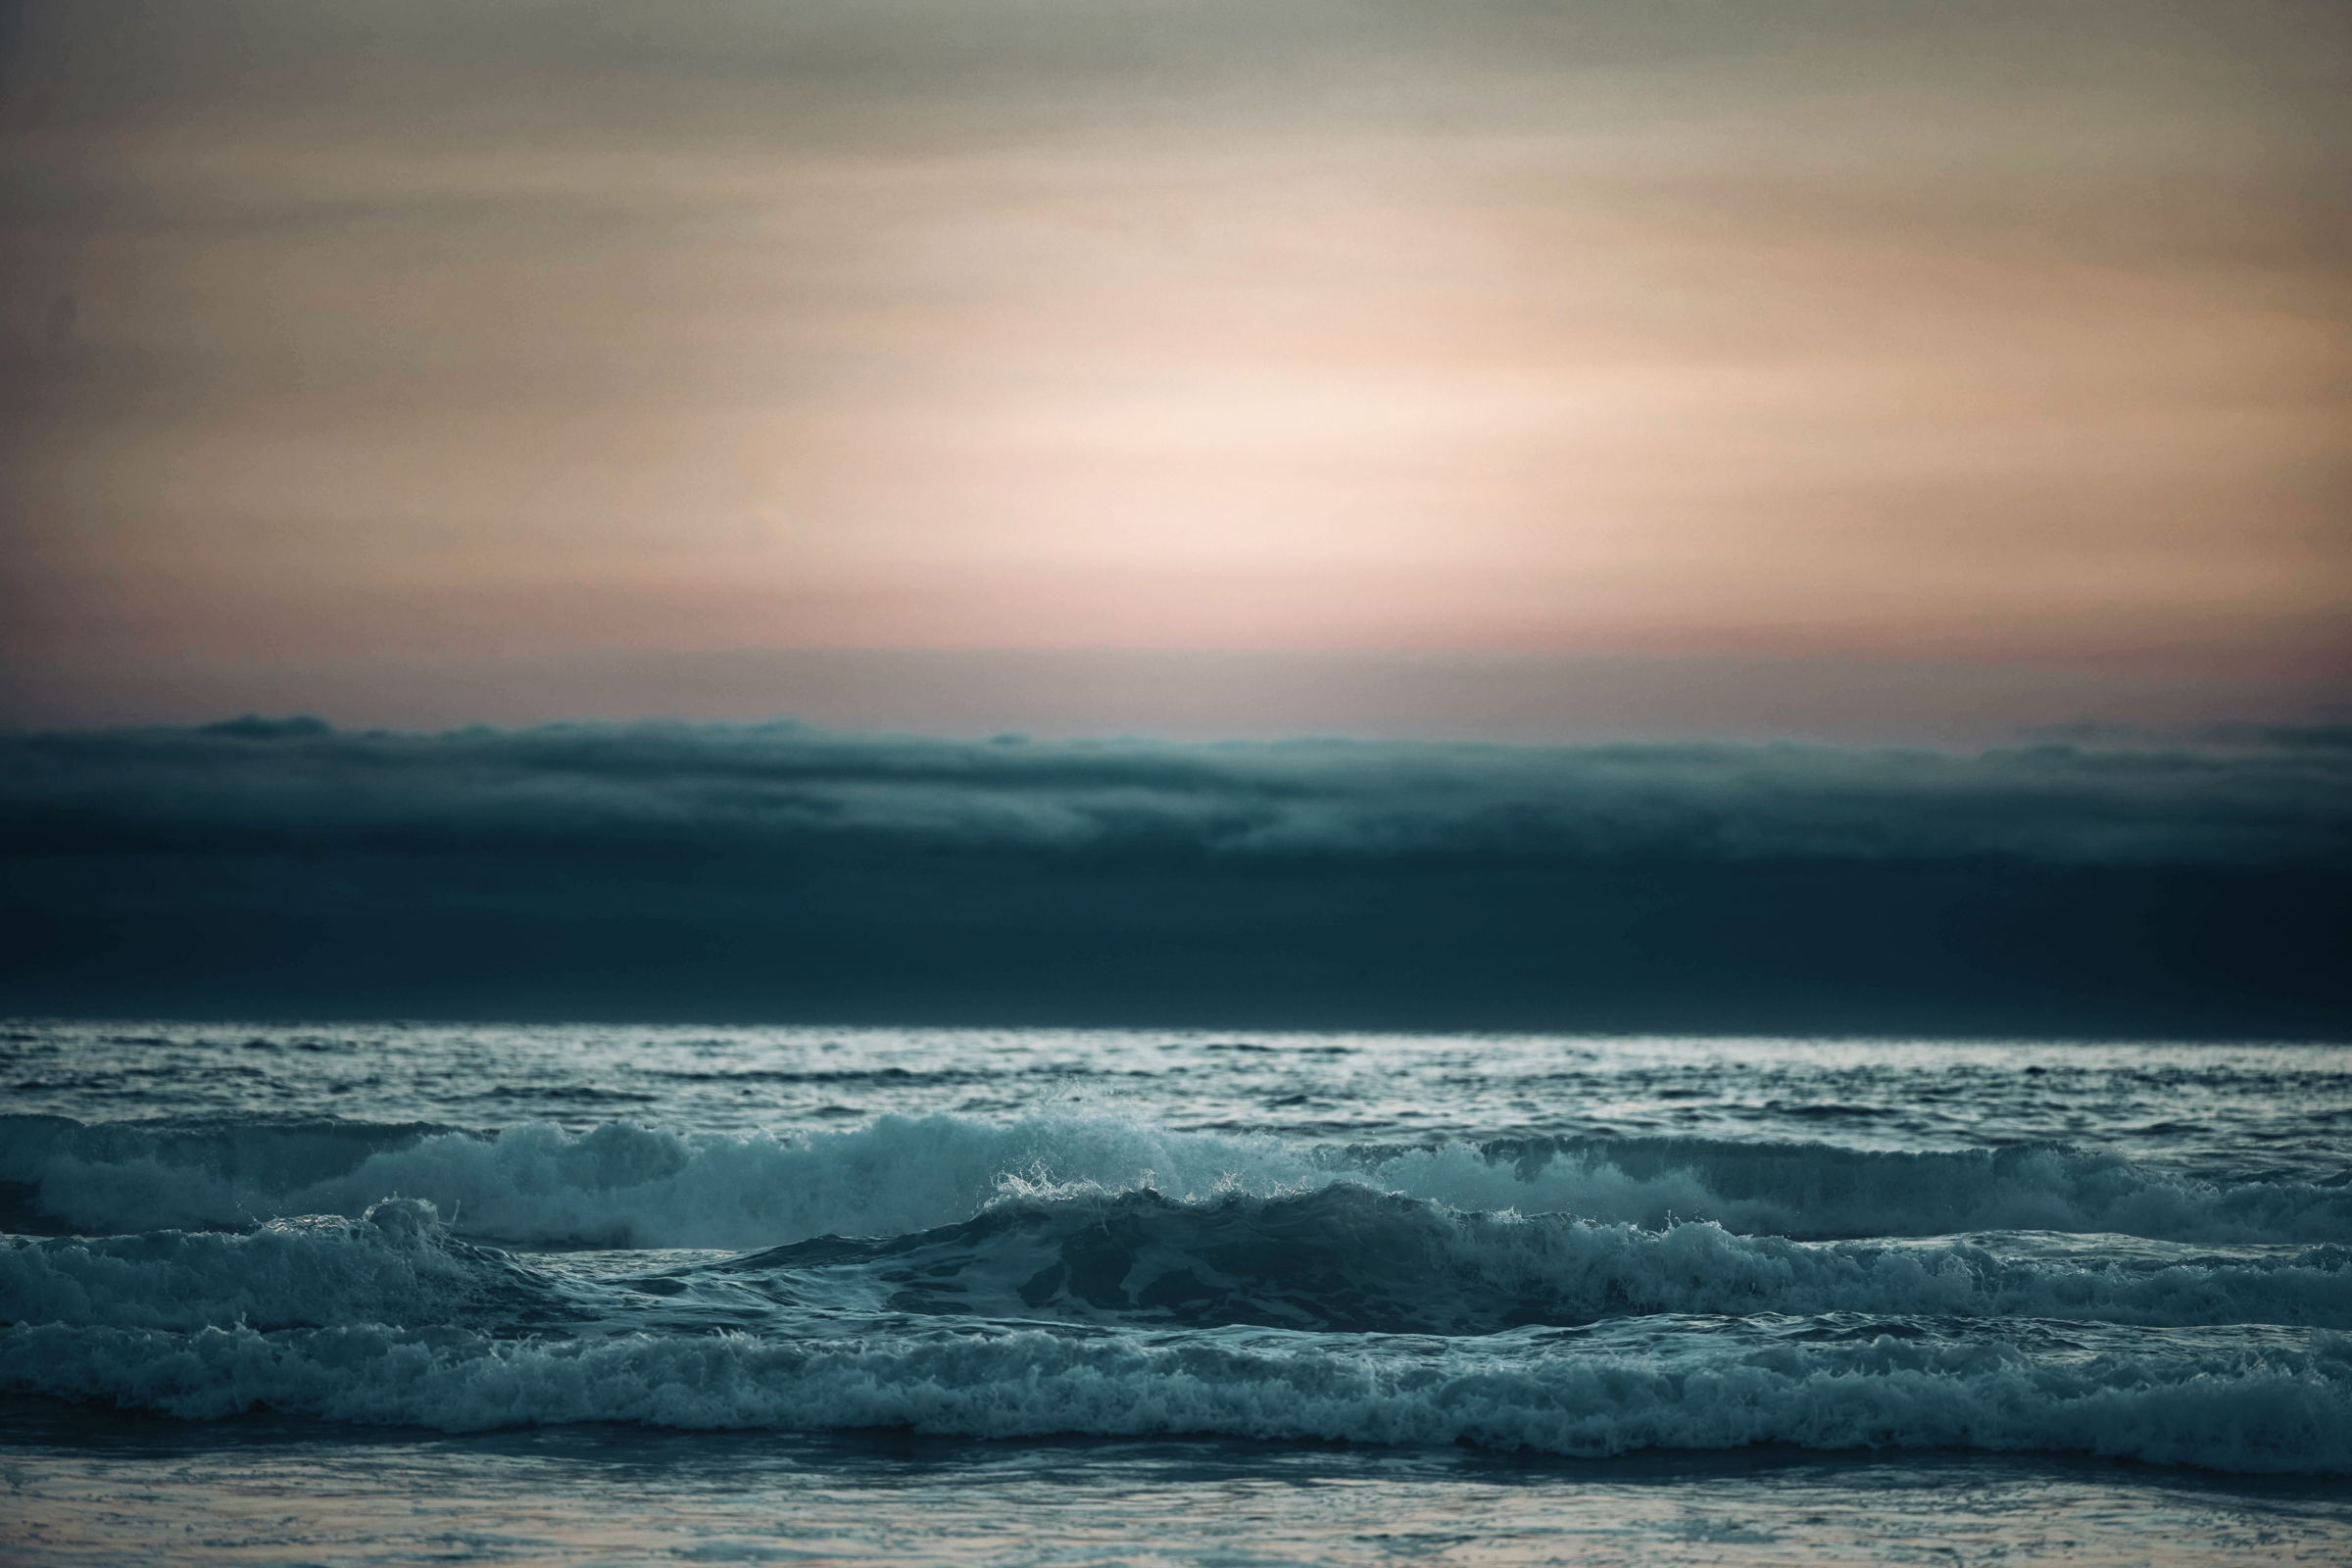 An ocean scene at twilight with gentle waves rolling in under a sky transitioning from warm pink and orange tones near the horizon to cool blue and gray hues, with a layer of low-lying clouds on the horizon—almost like a tidal wave approaching.